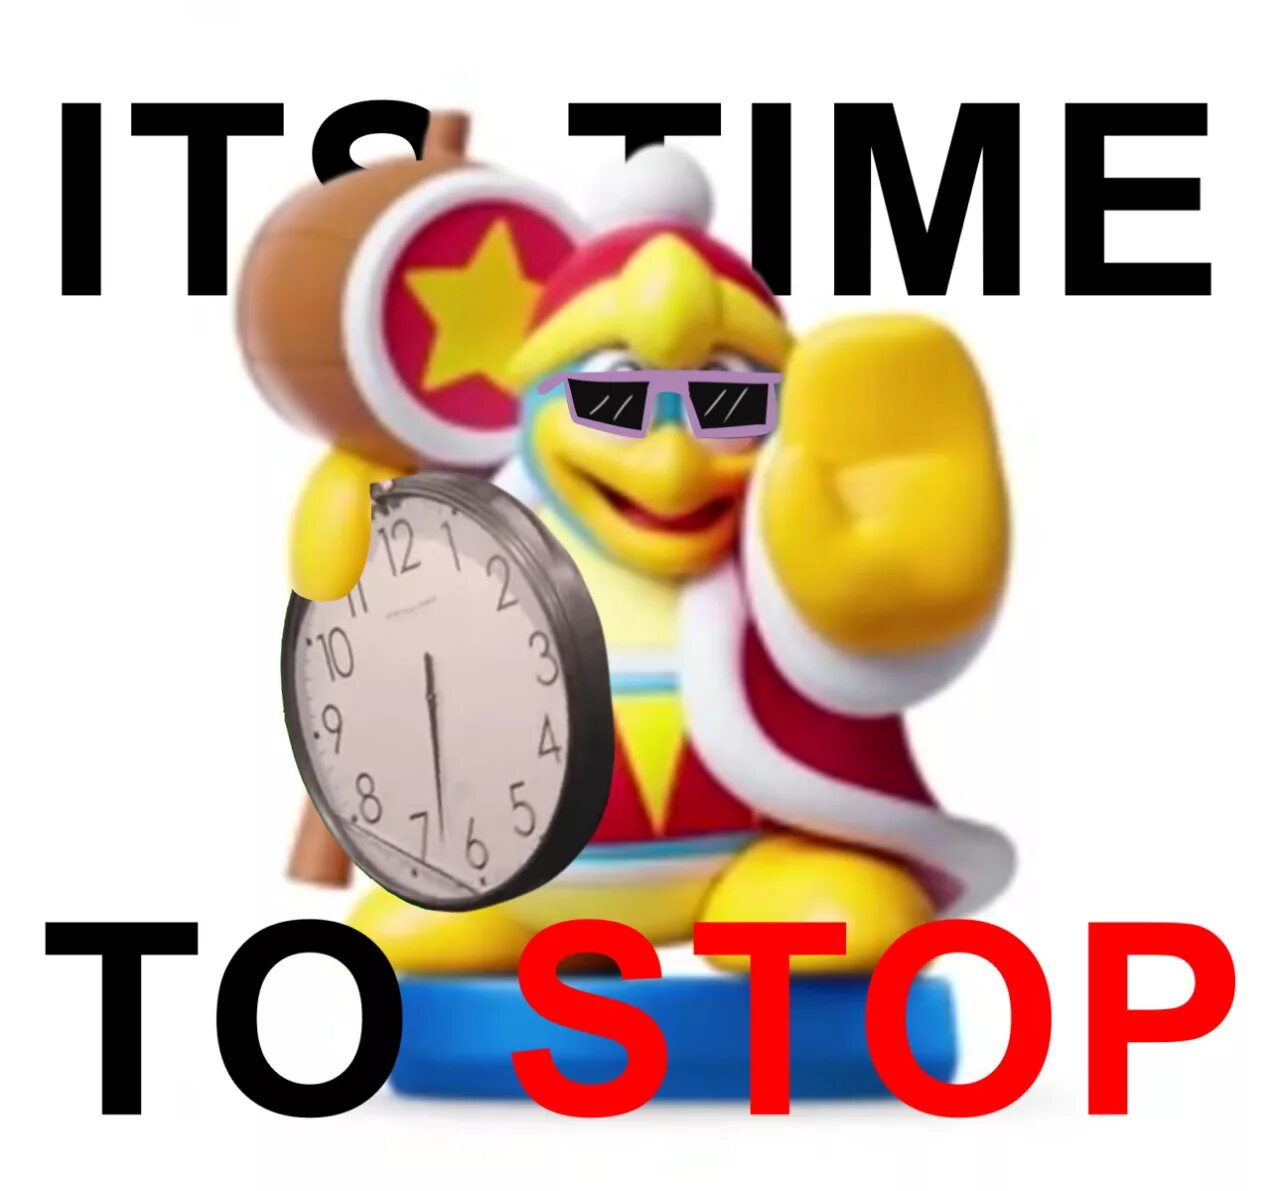 Its time to. Its time to stop. Its time to stop Мем. It`s time to. Its время